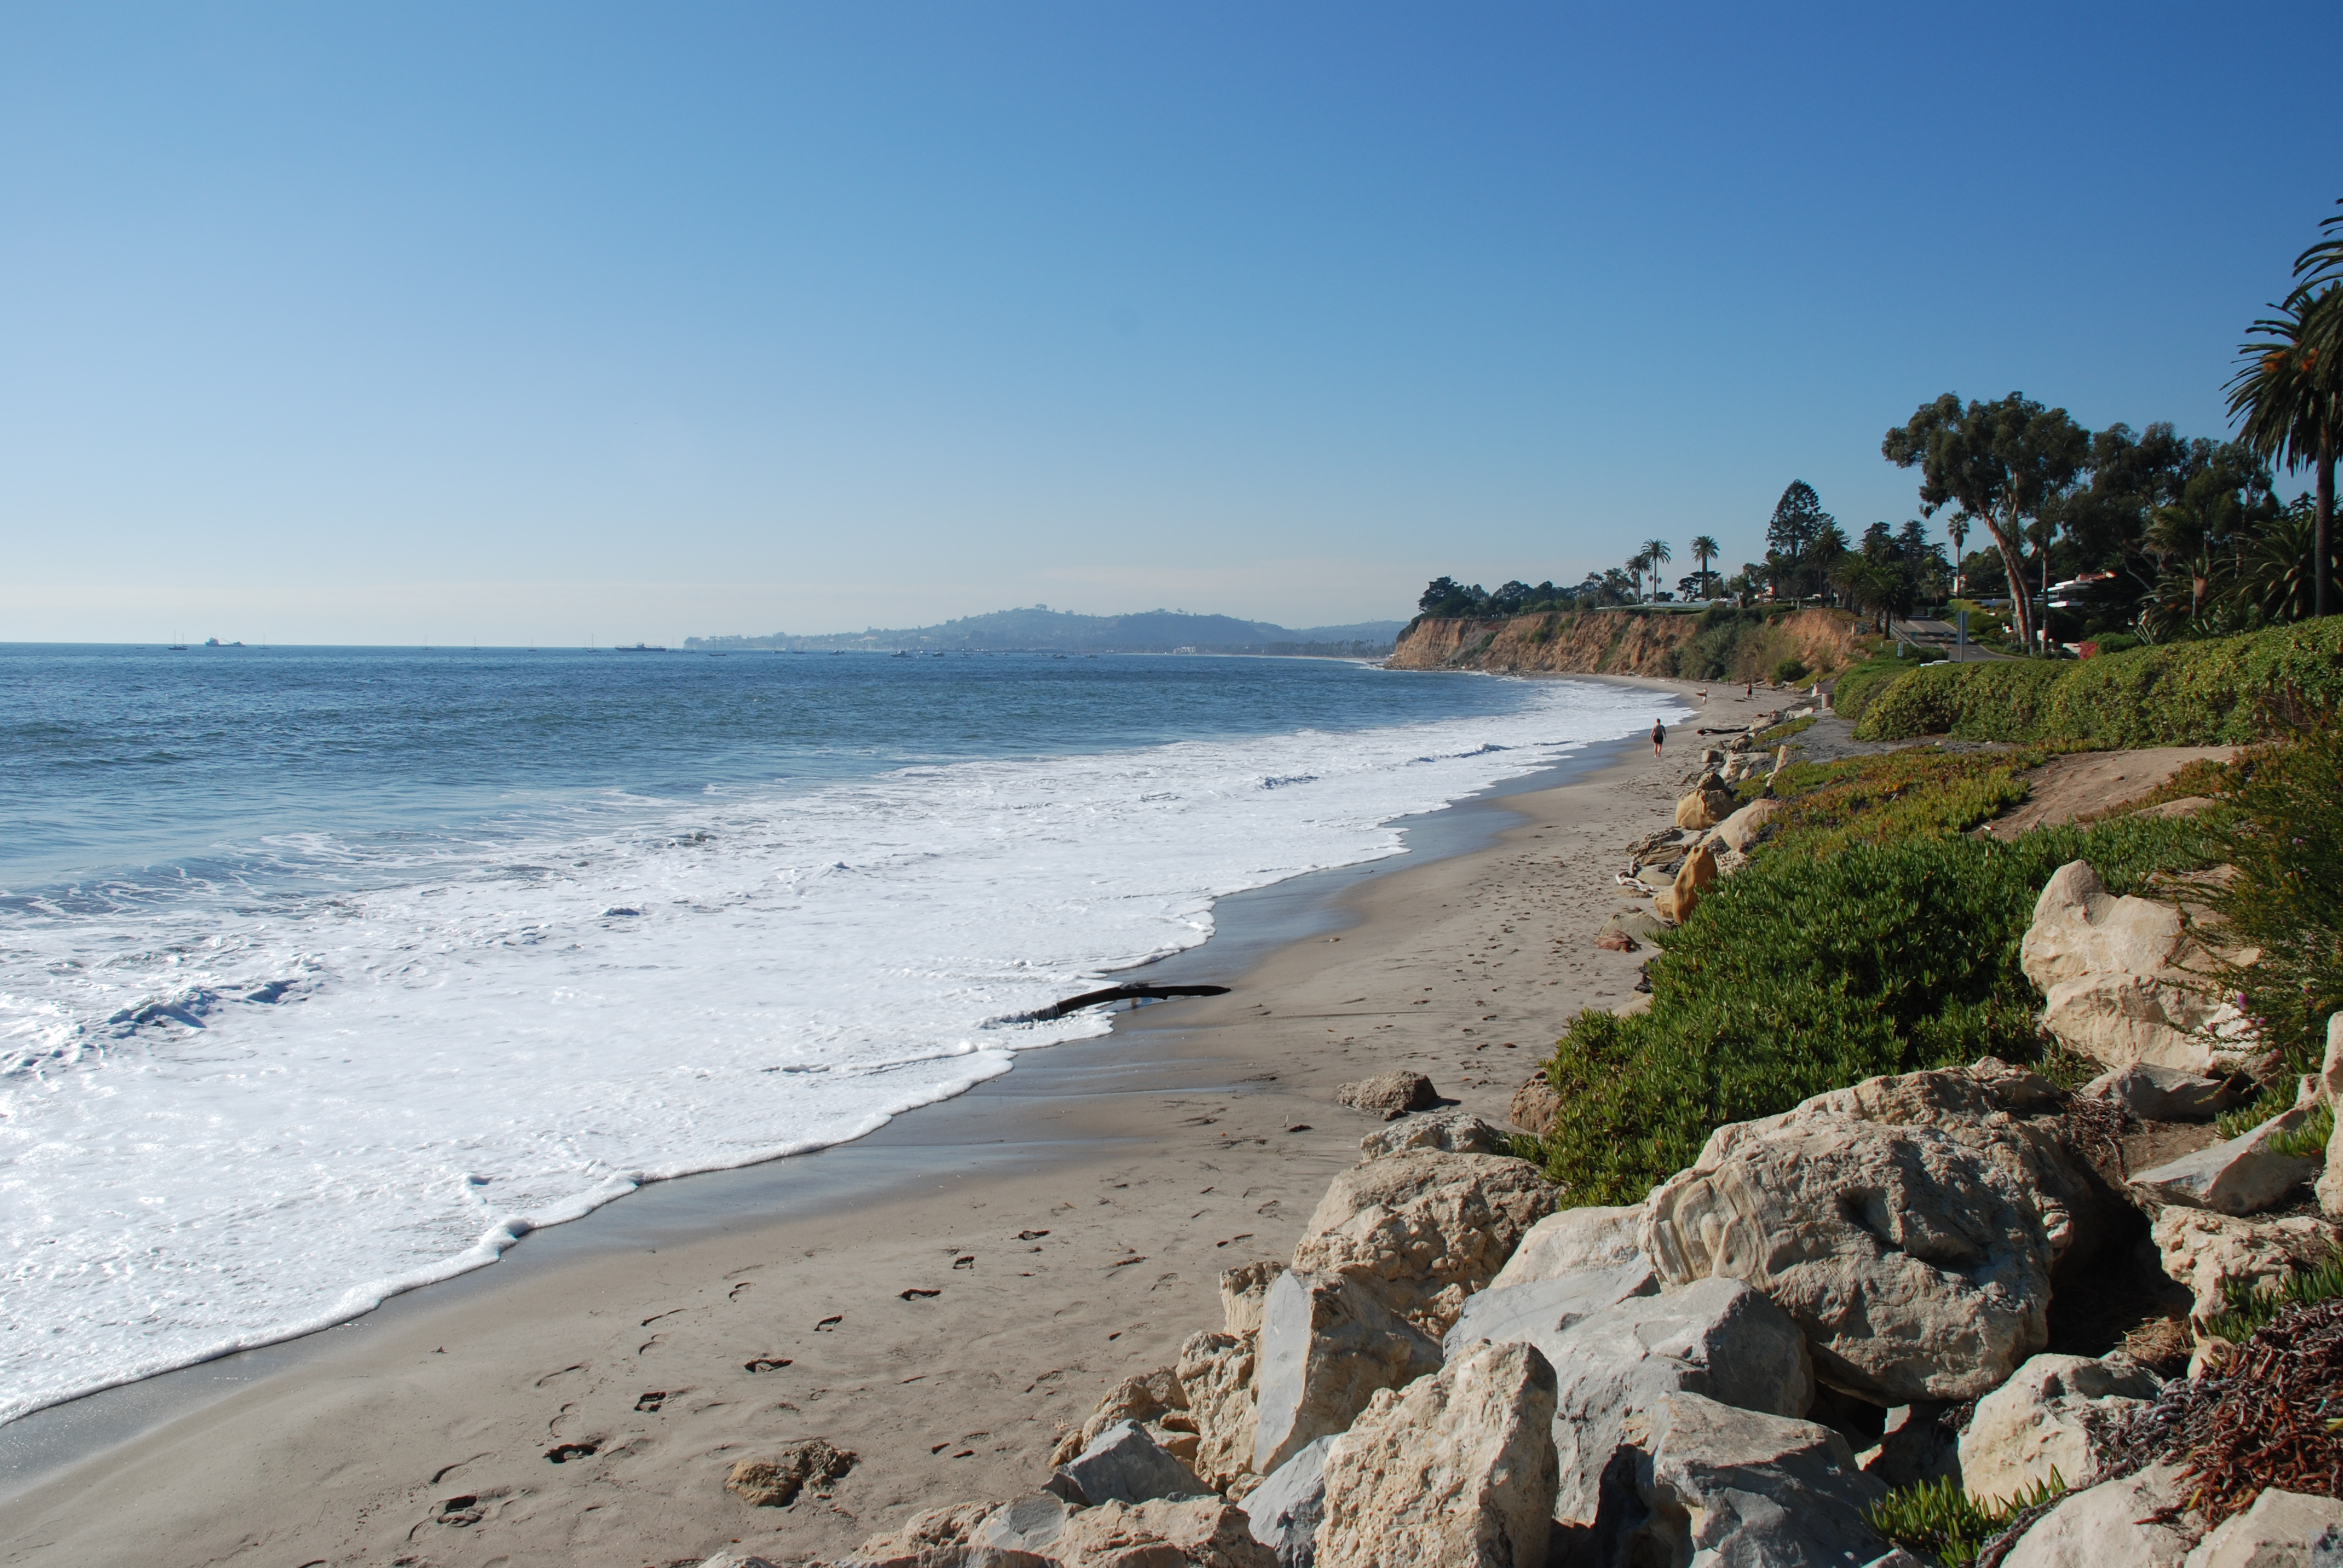 Whats the Best Beach for You in Santa Barbara?